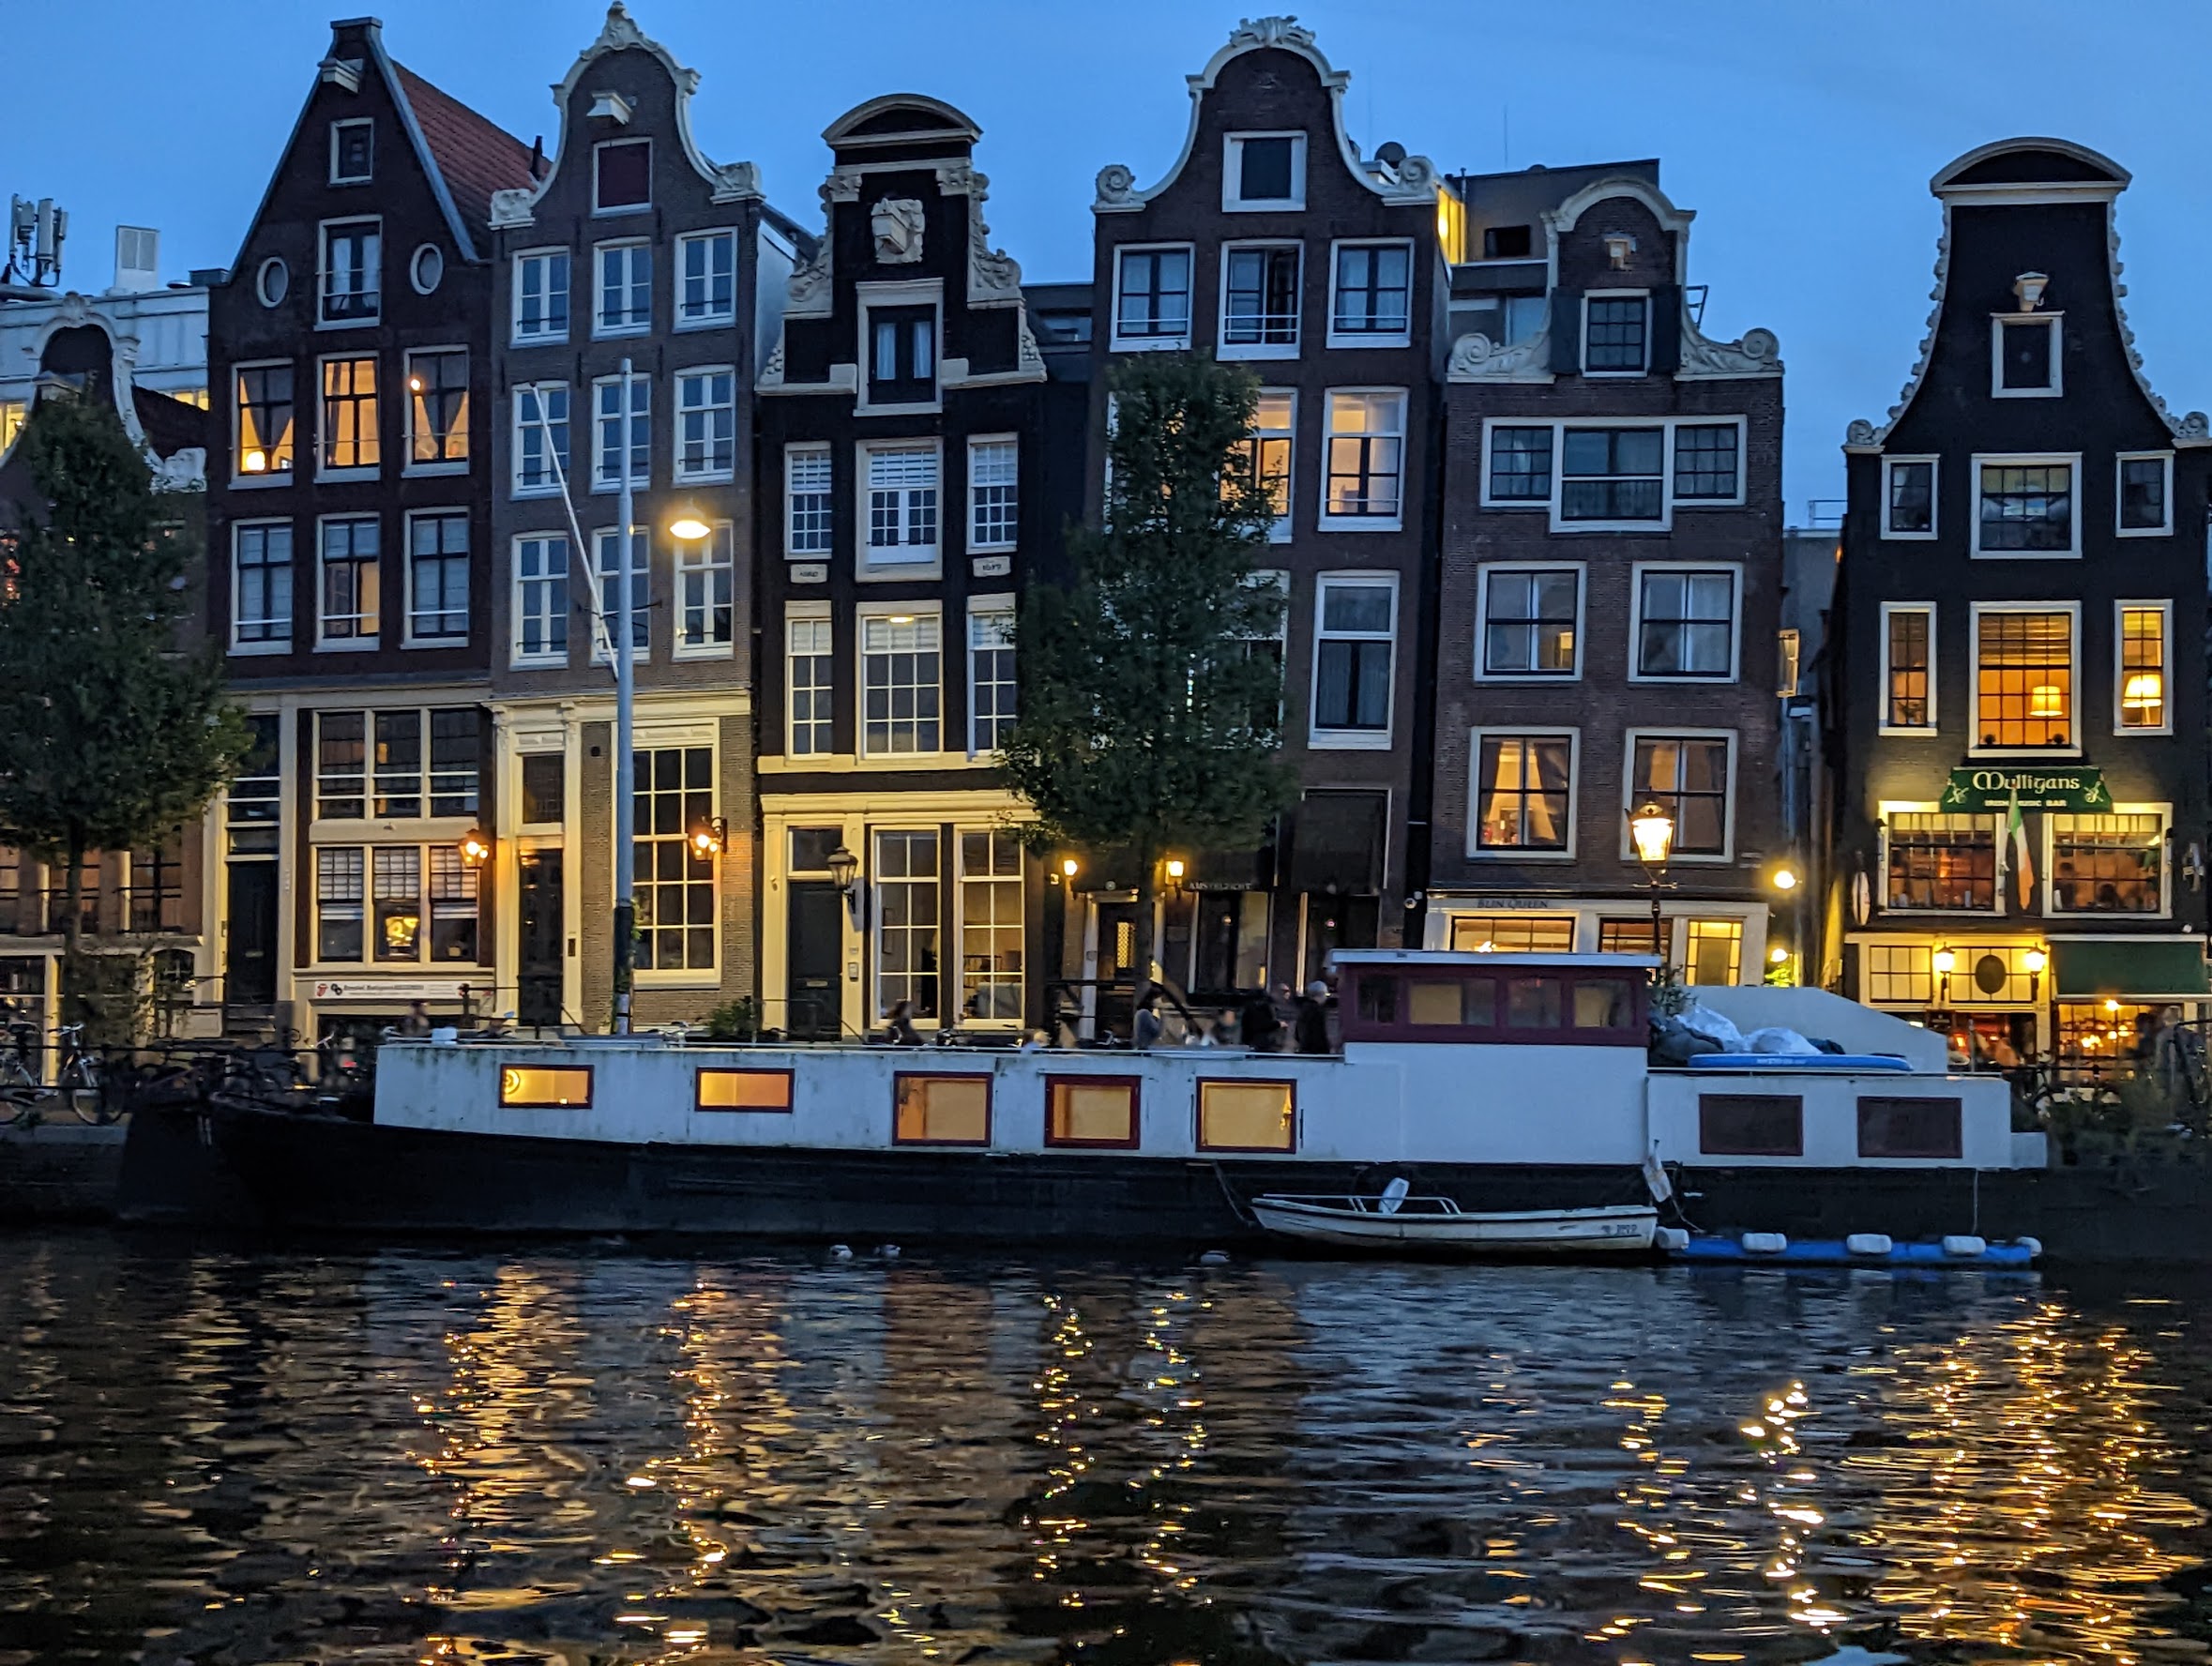 A picture of houses in Amsterdam